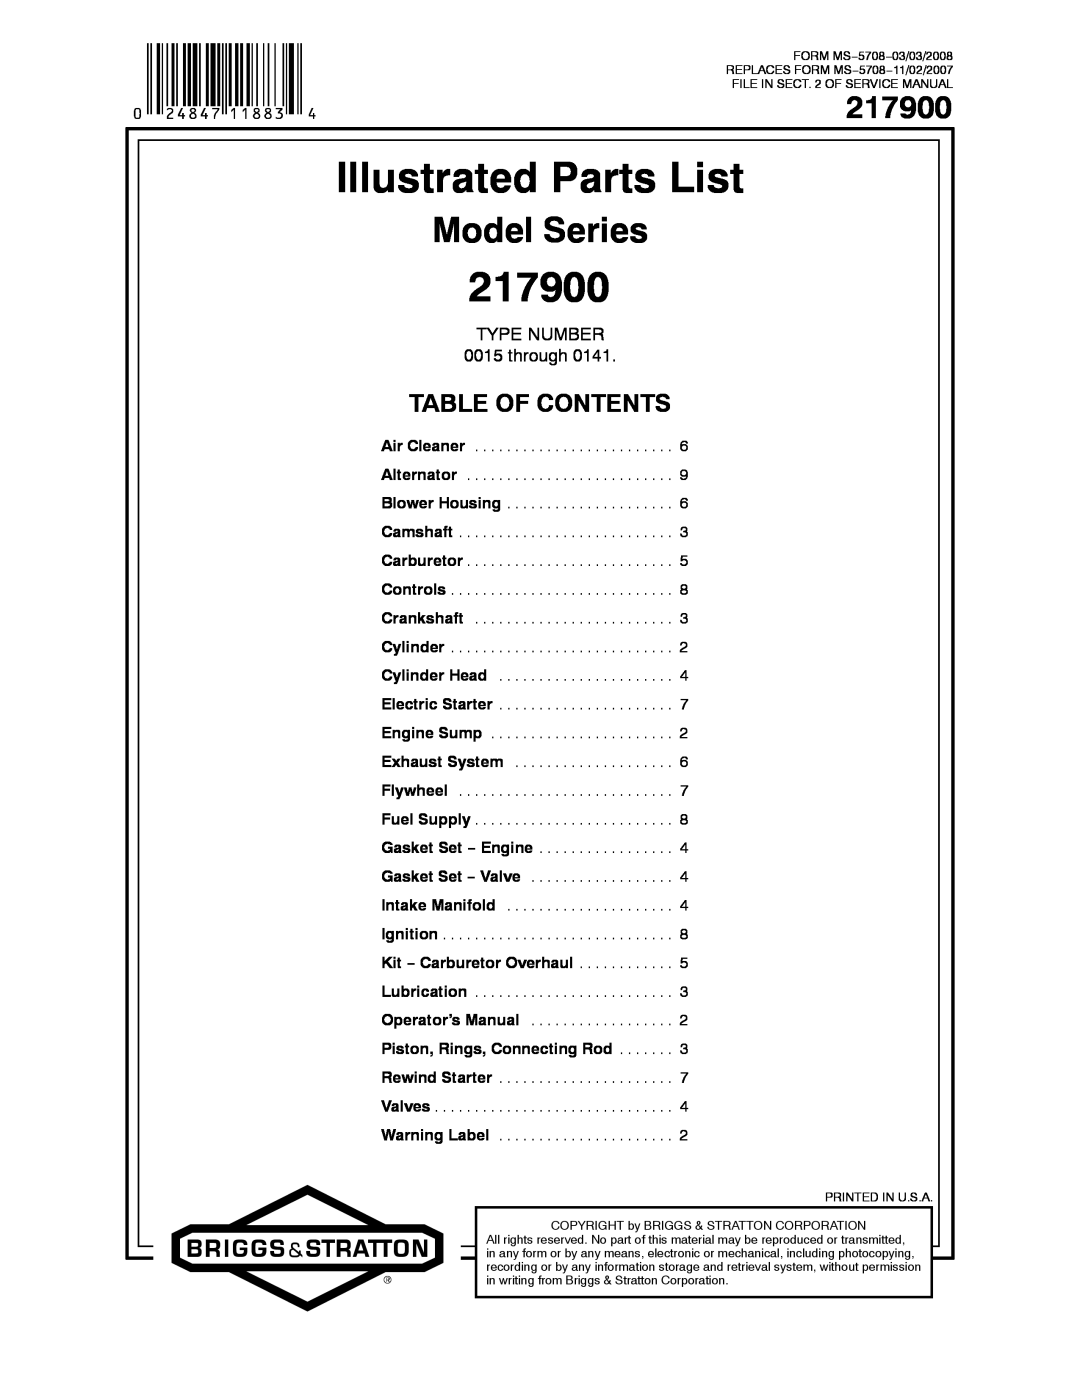 Briggs & Stratton 217900 service manual Model Series, Illustrated Parts List, Table Of Contents, TYPE NUMBER 0015 through 